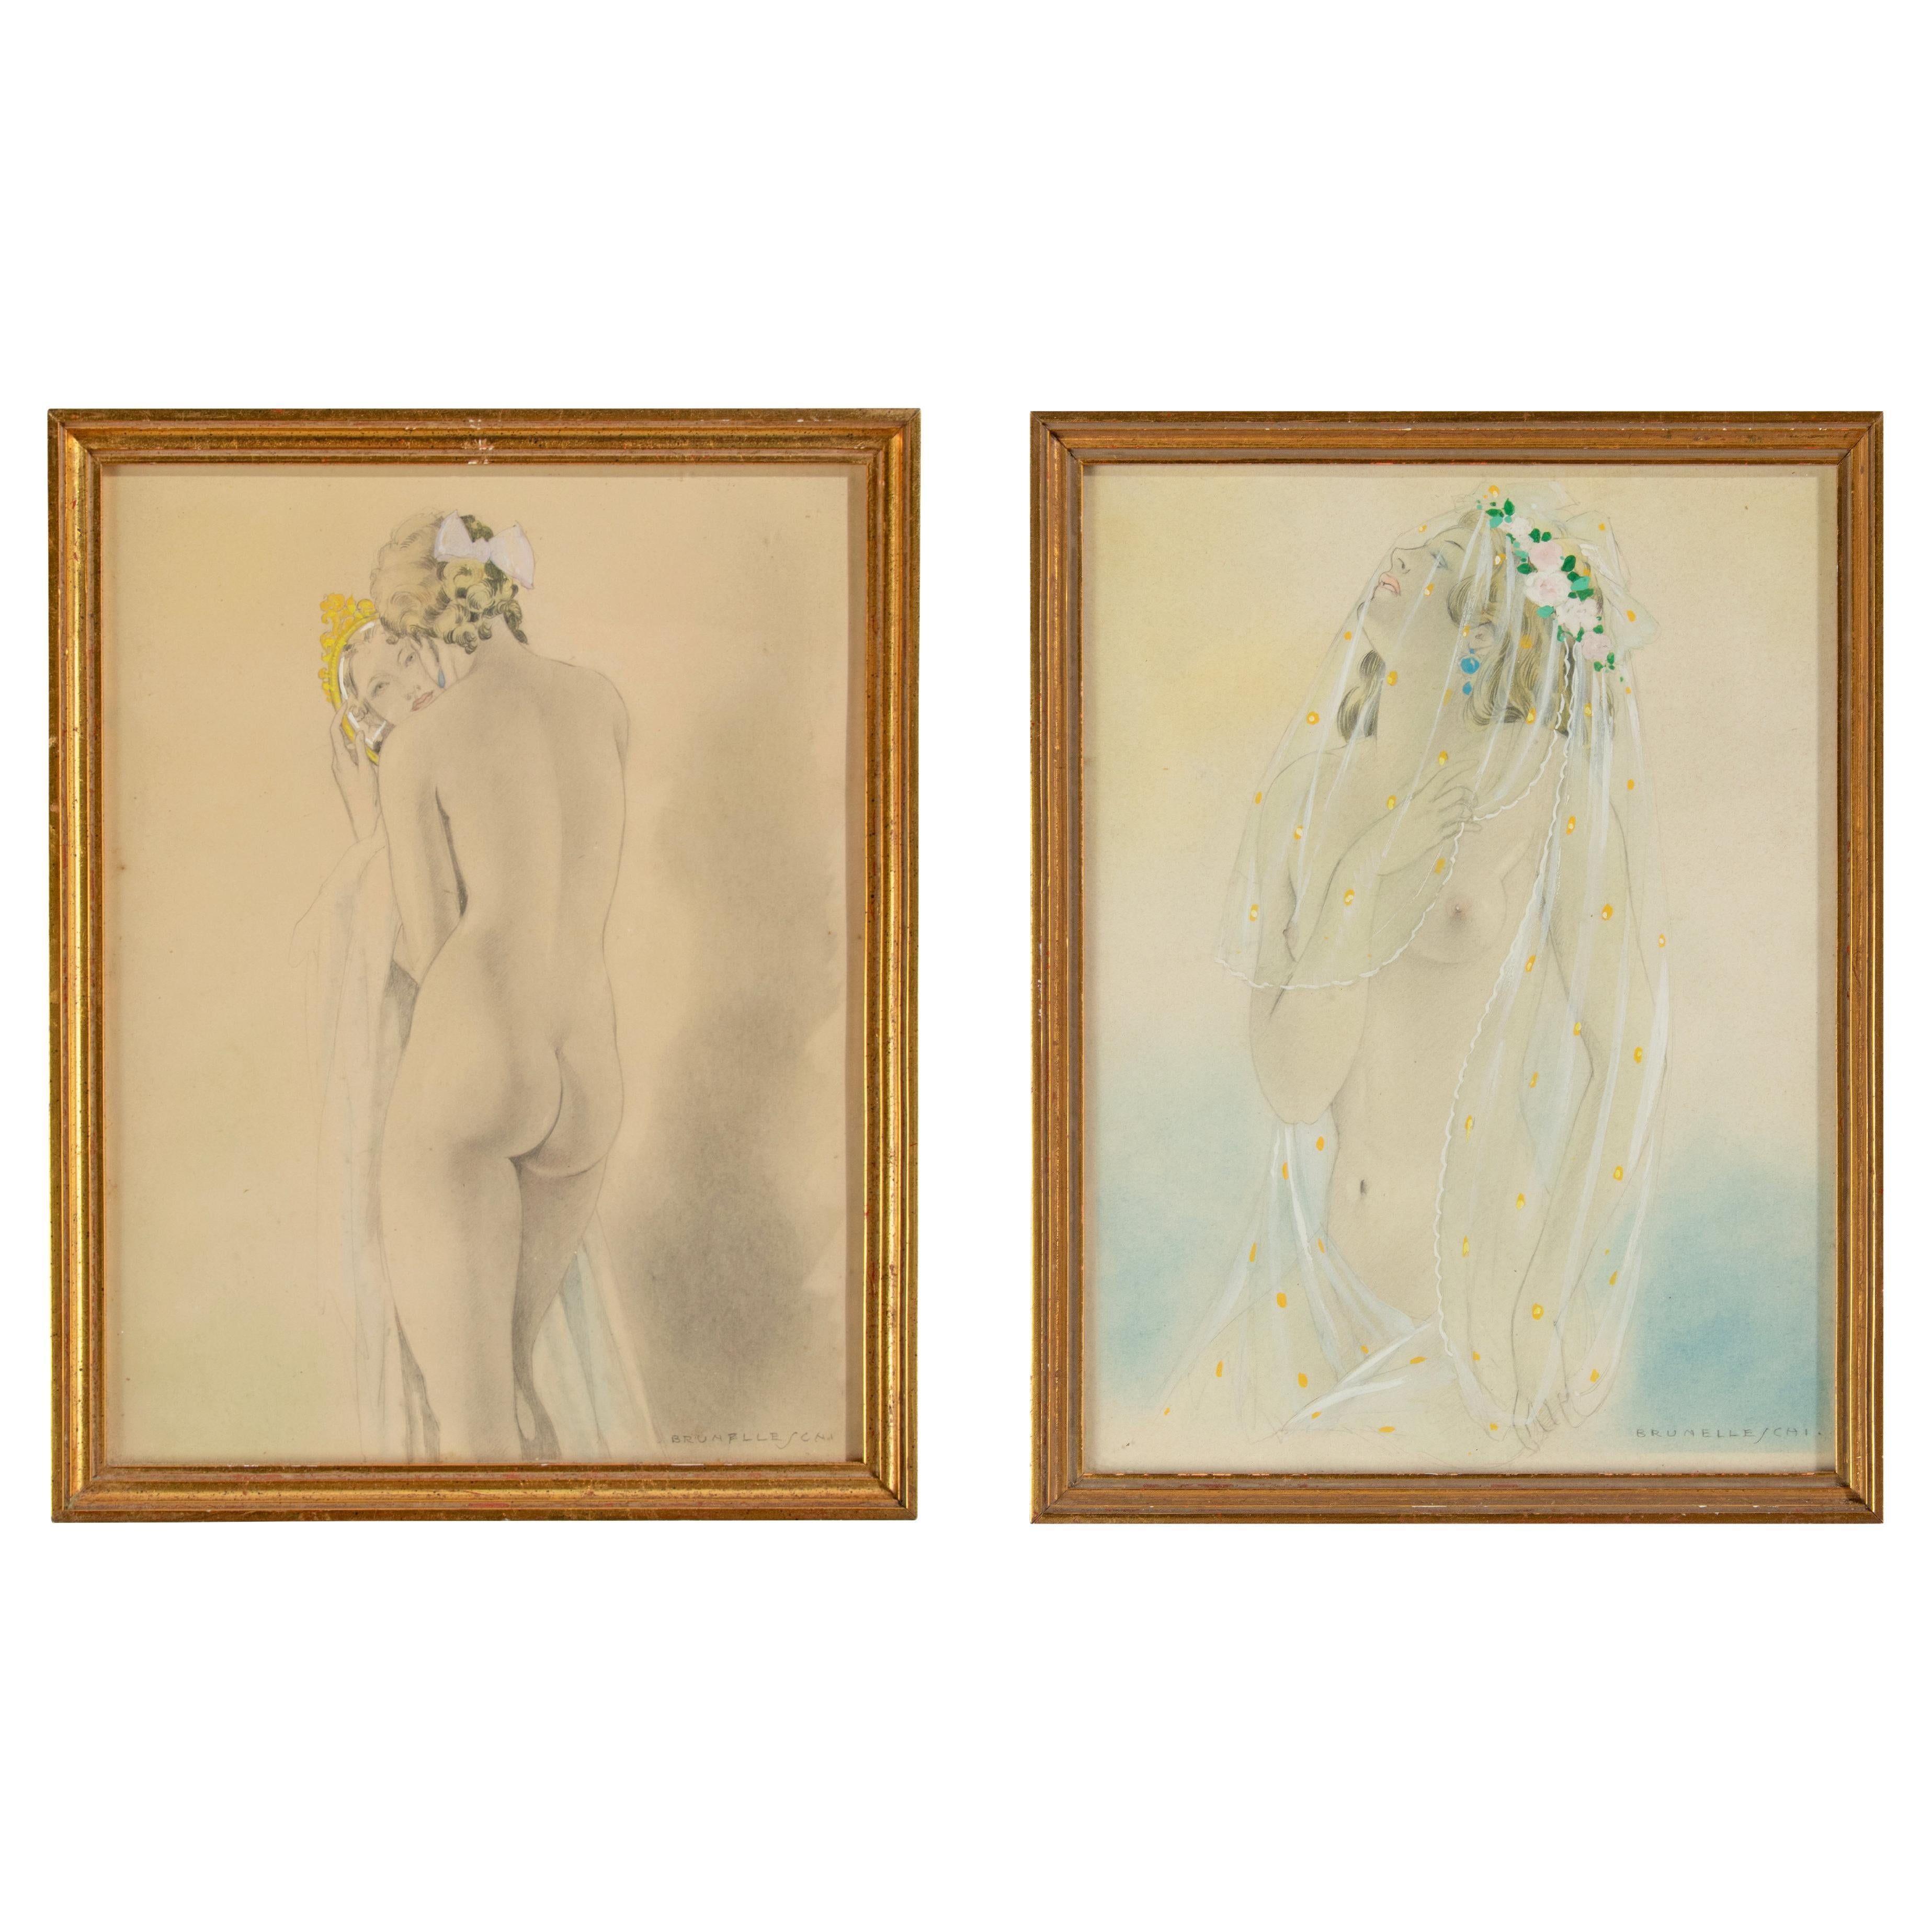 Pair of Art Deco Period Erotic Drawings / Watercolours by Umberto Brunelleschi For Sale